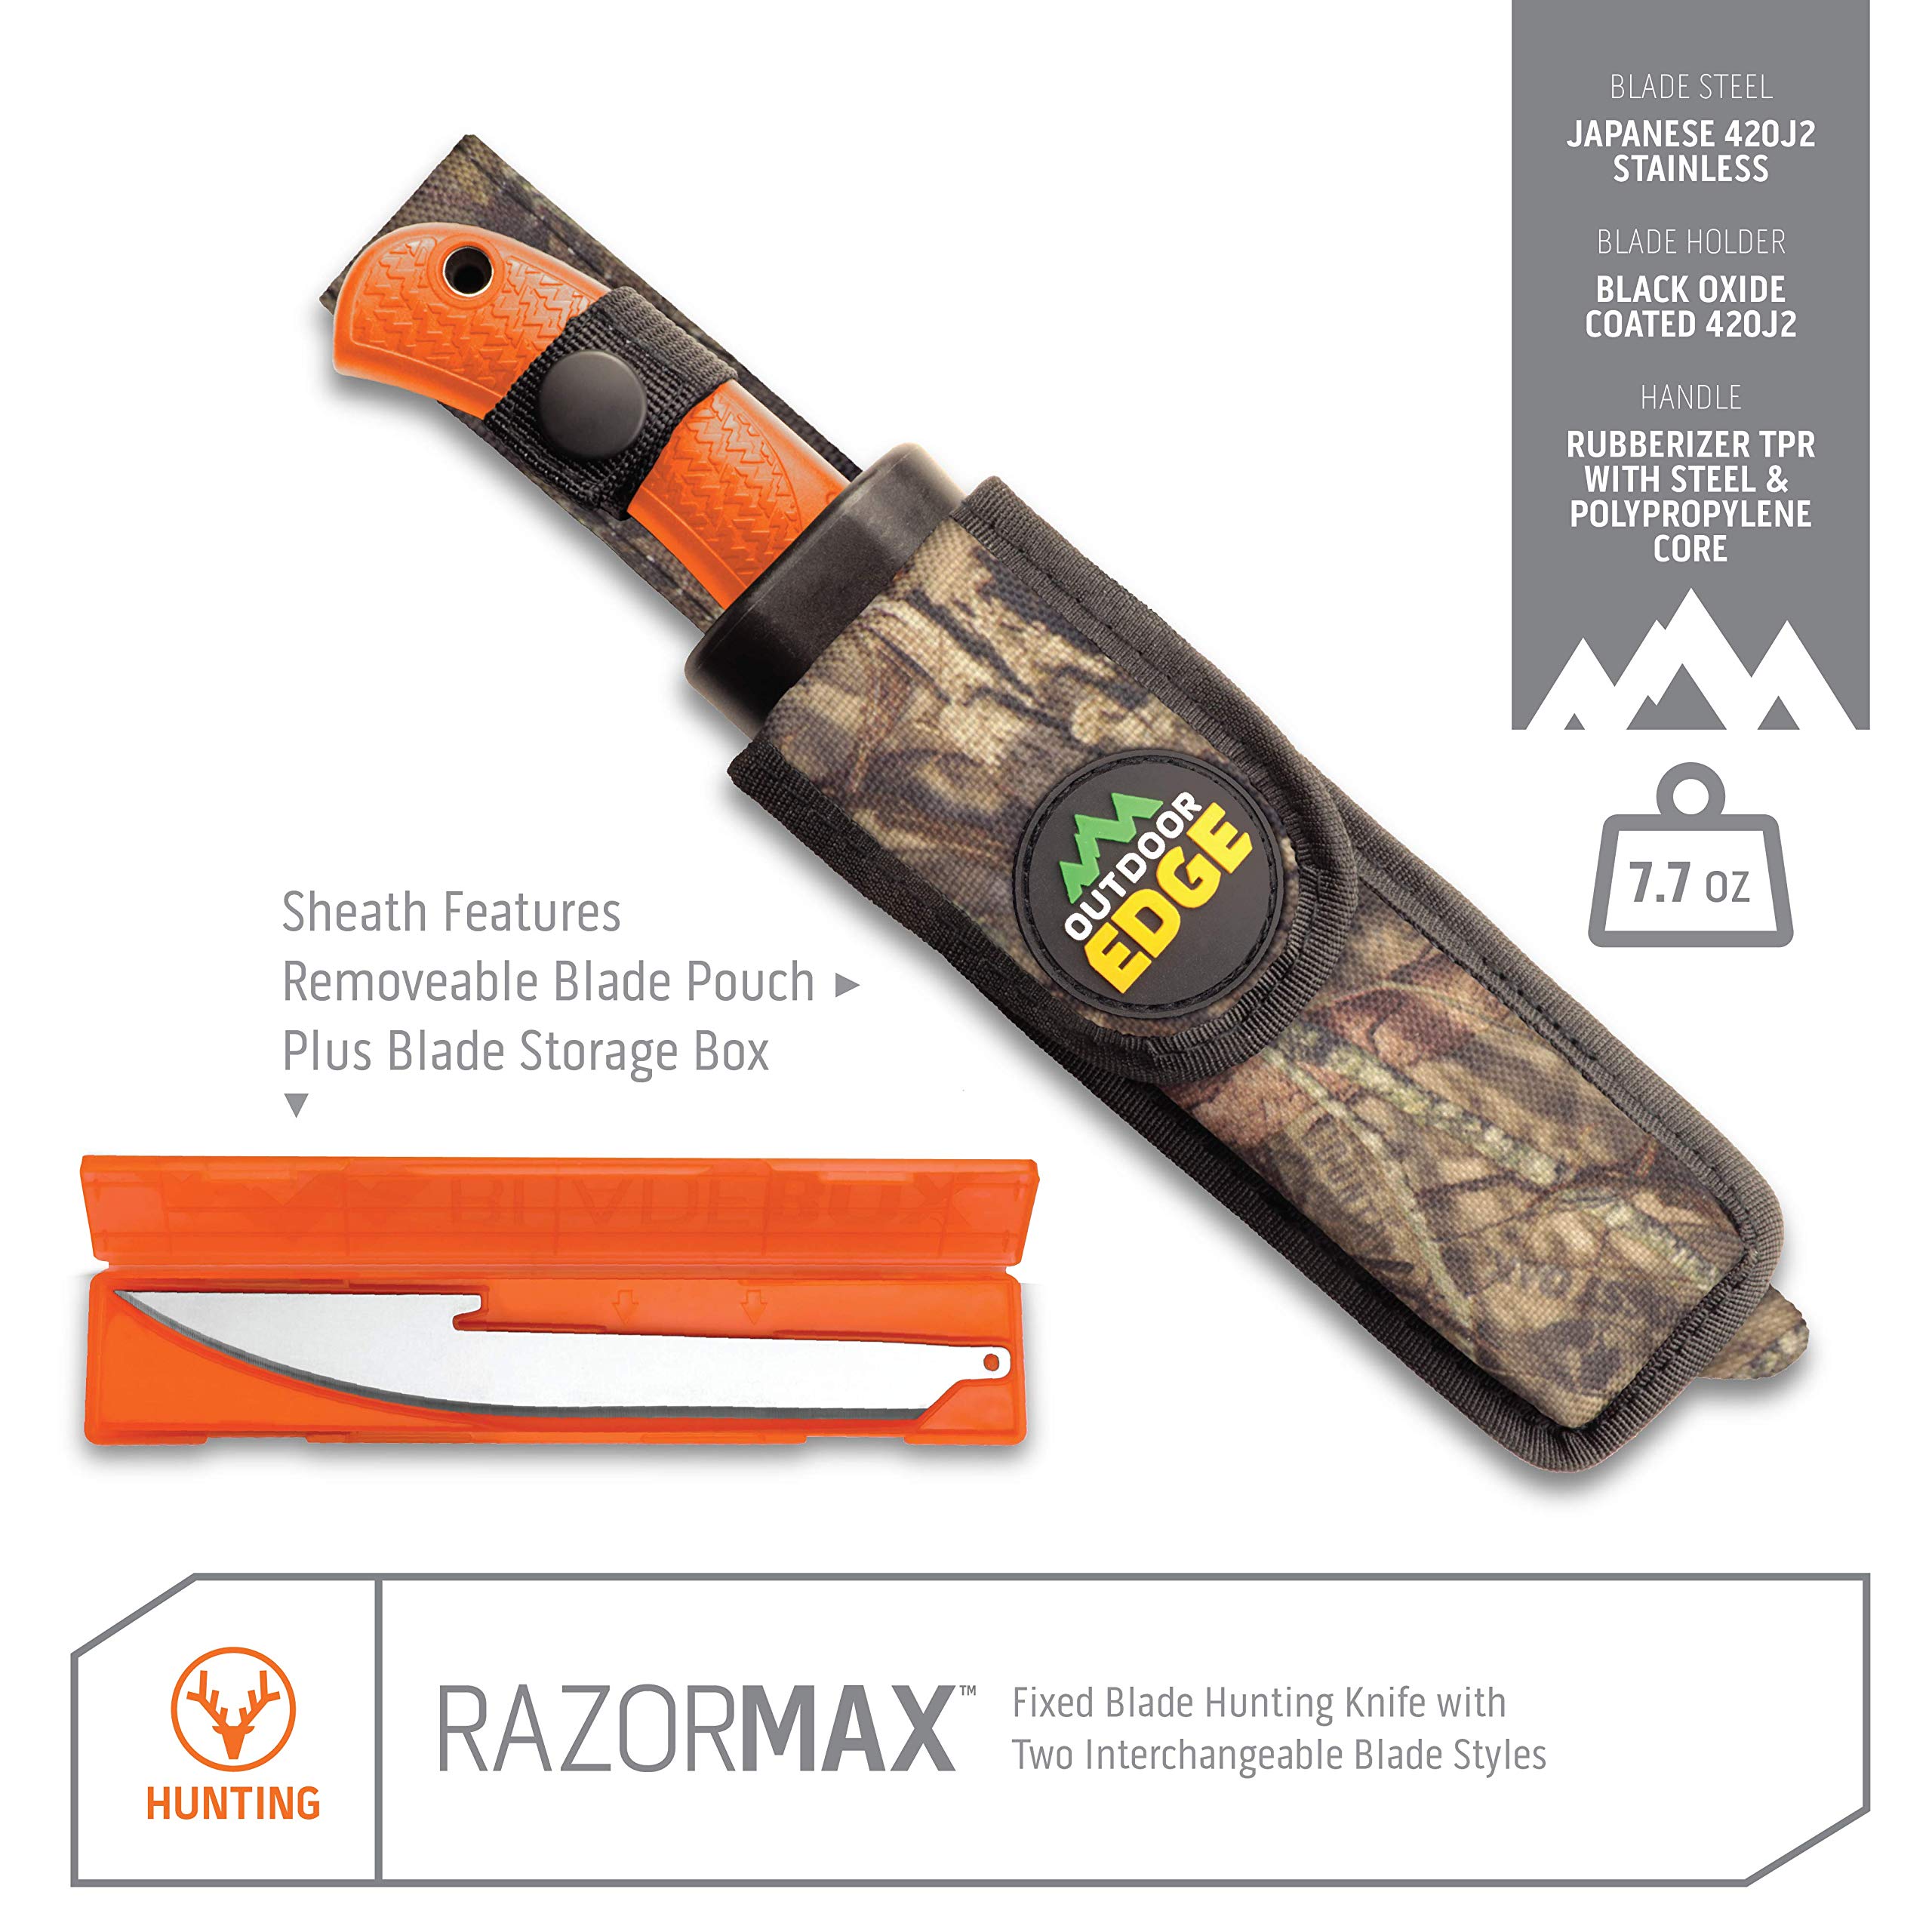 OUTDOOR EDGE RazorMax - Replaceable Fixed Blade Hunting Knife with 3.5